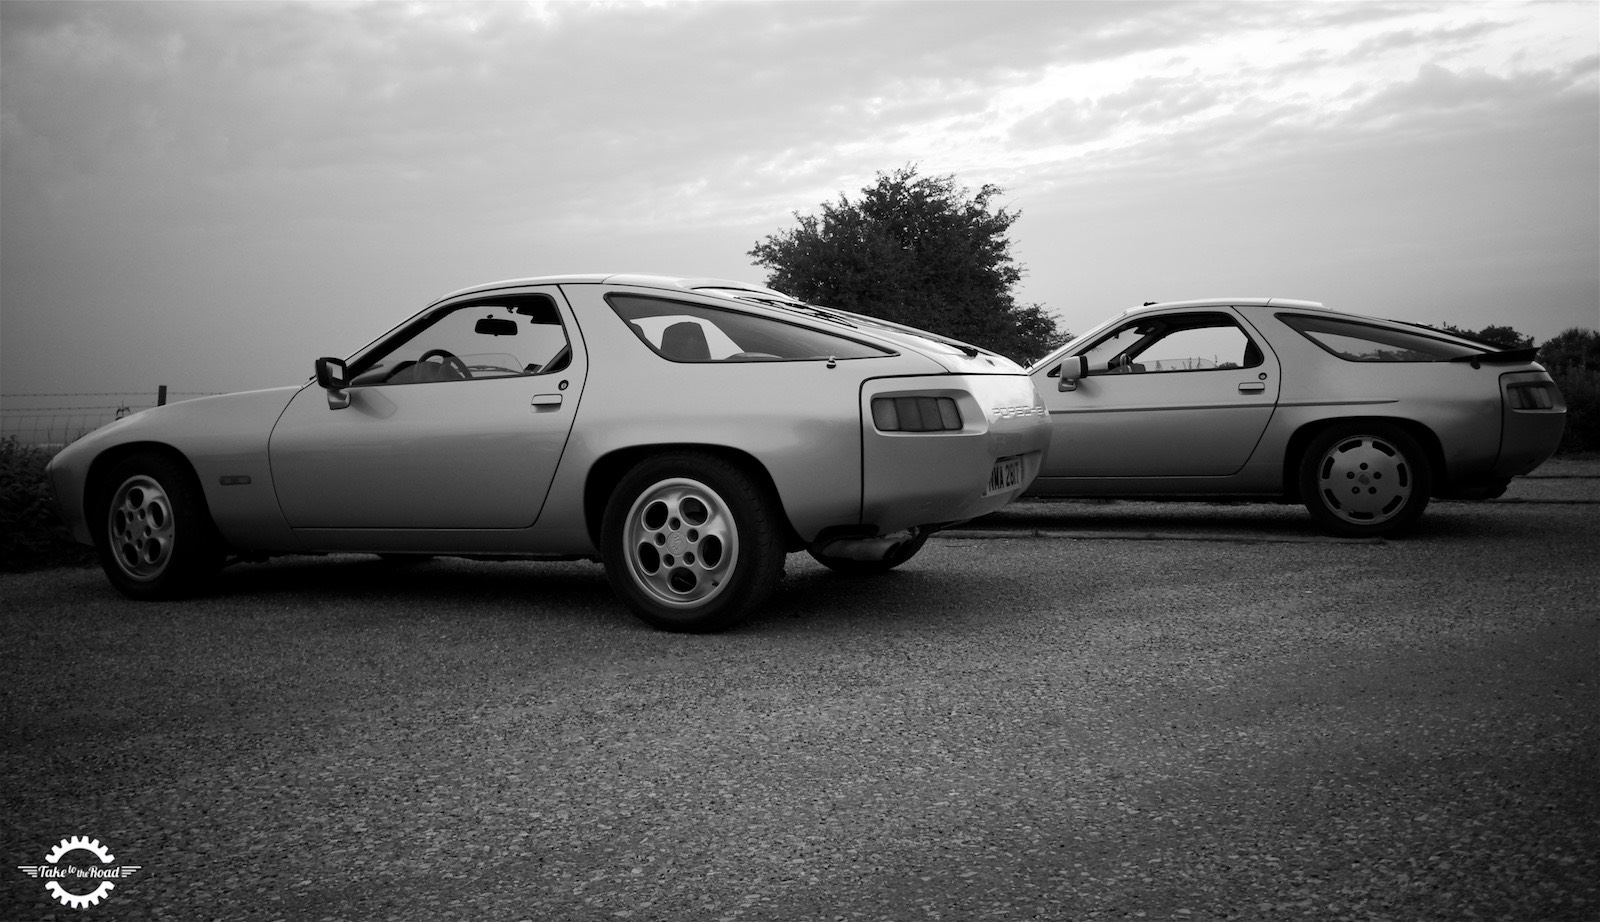 Take to the Road Feature Two Land Sharks - Porsche 928 40th Anniversary